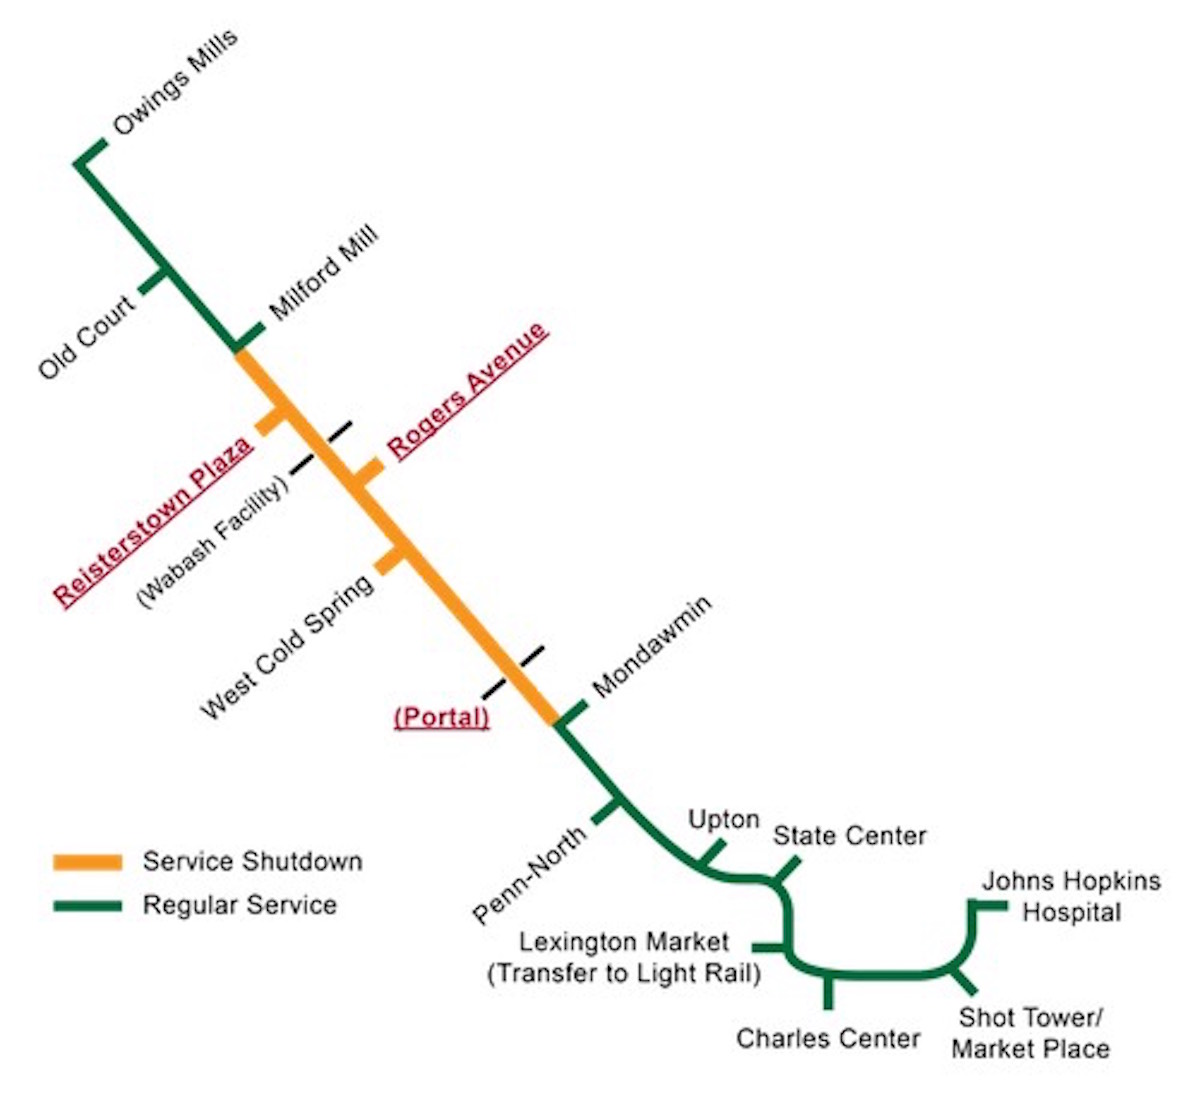 A shutdown map showing where each of the interlockings are along the subway system. (Courtesy Maryland Transit Administration)